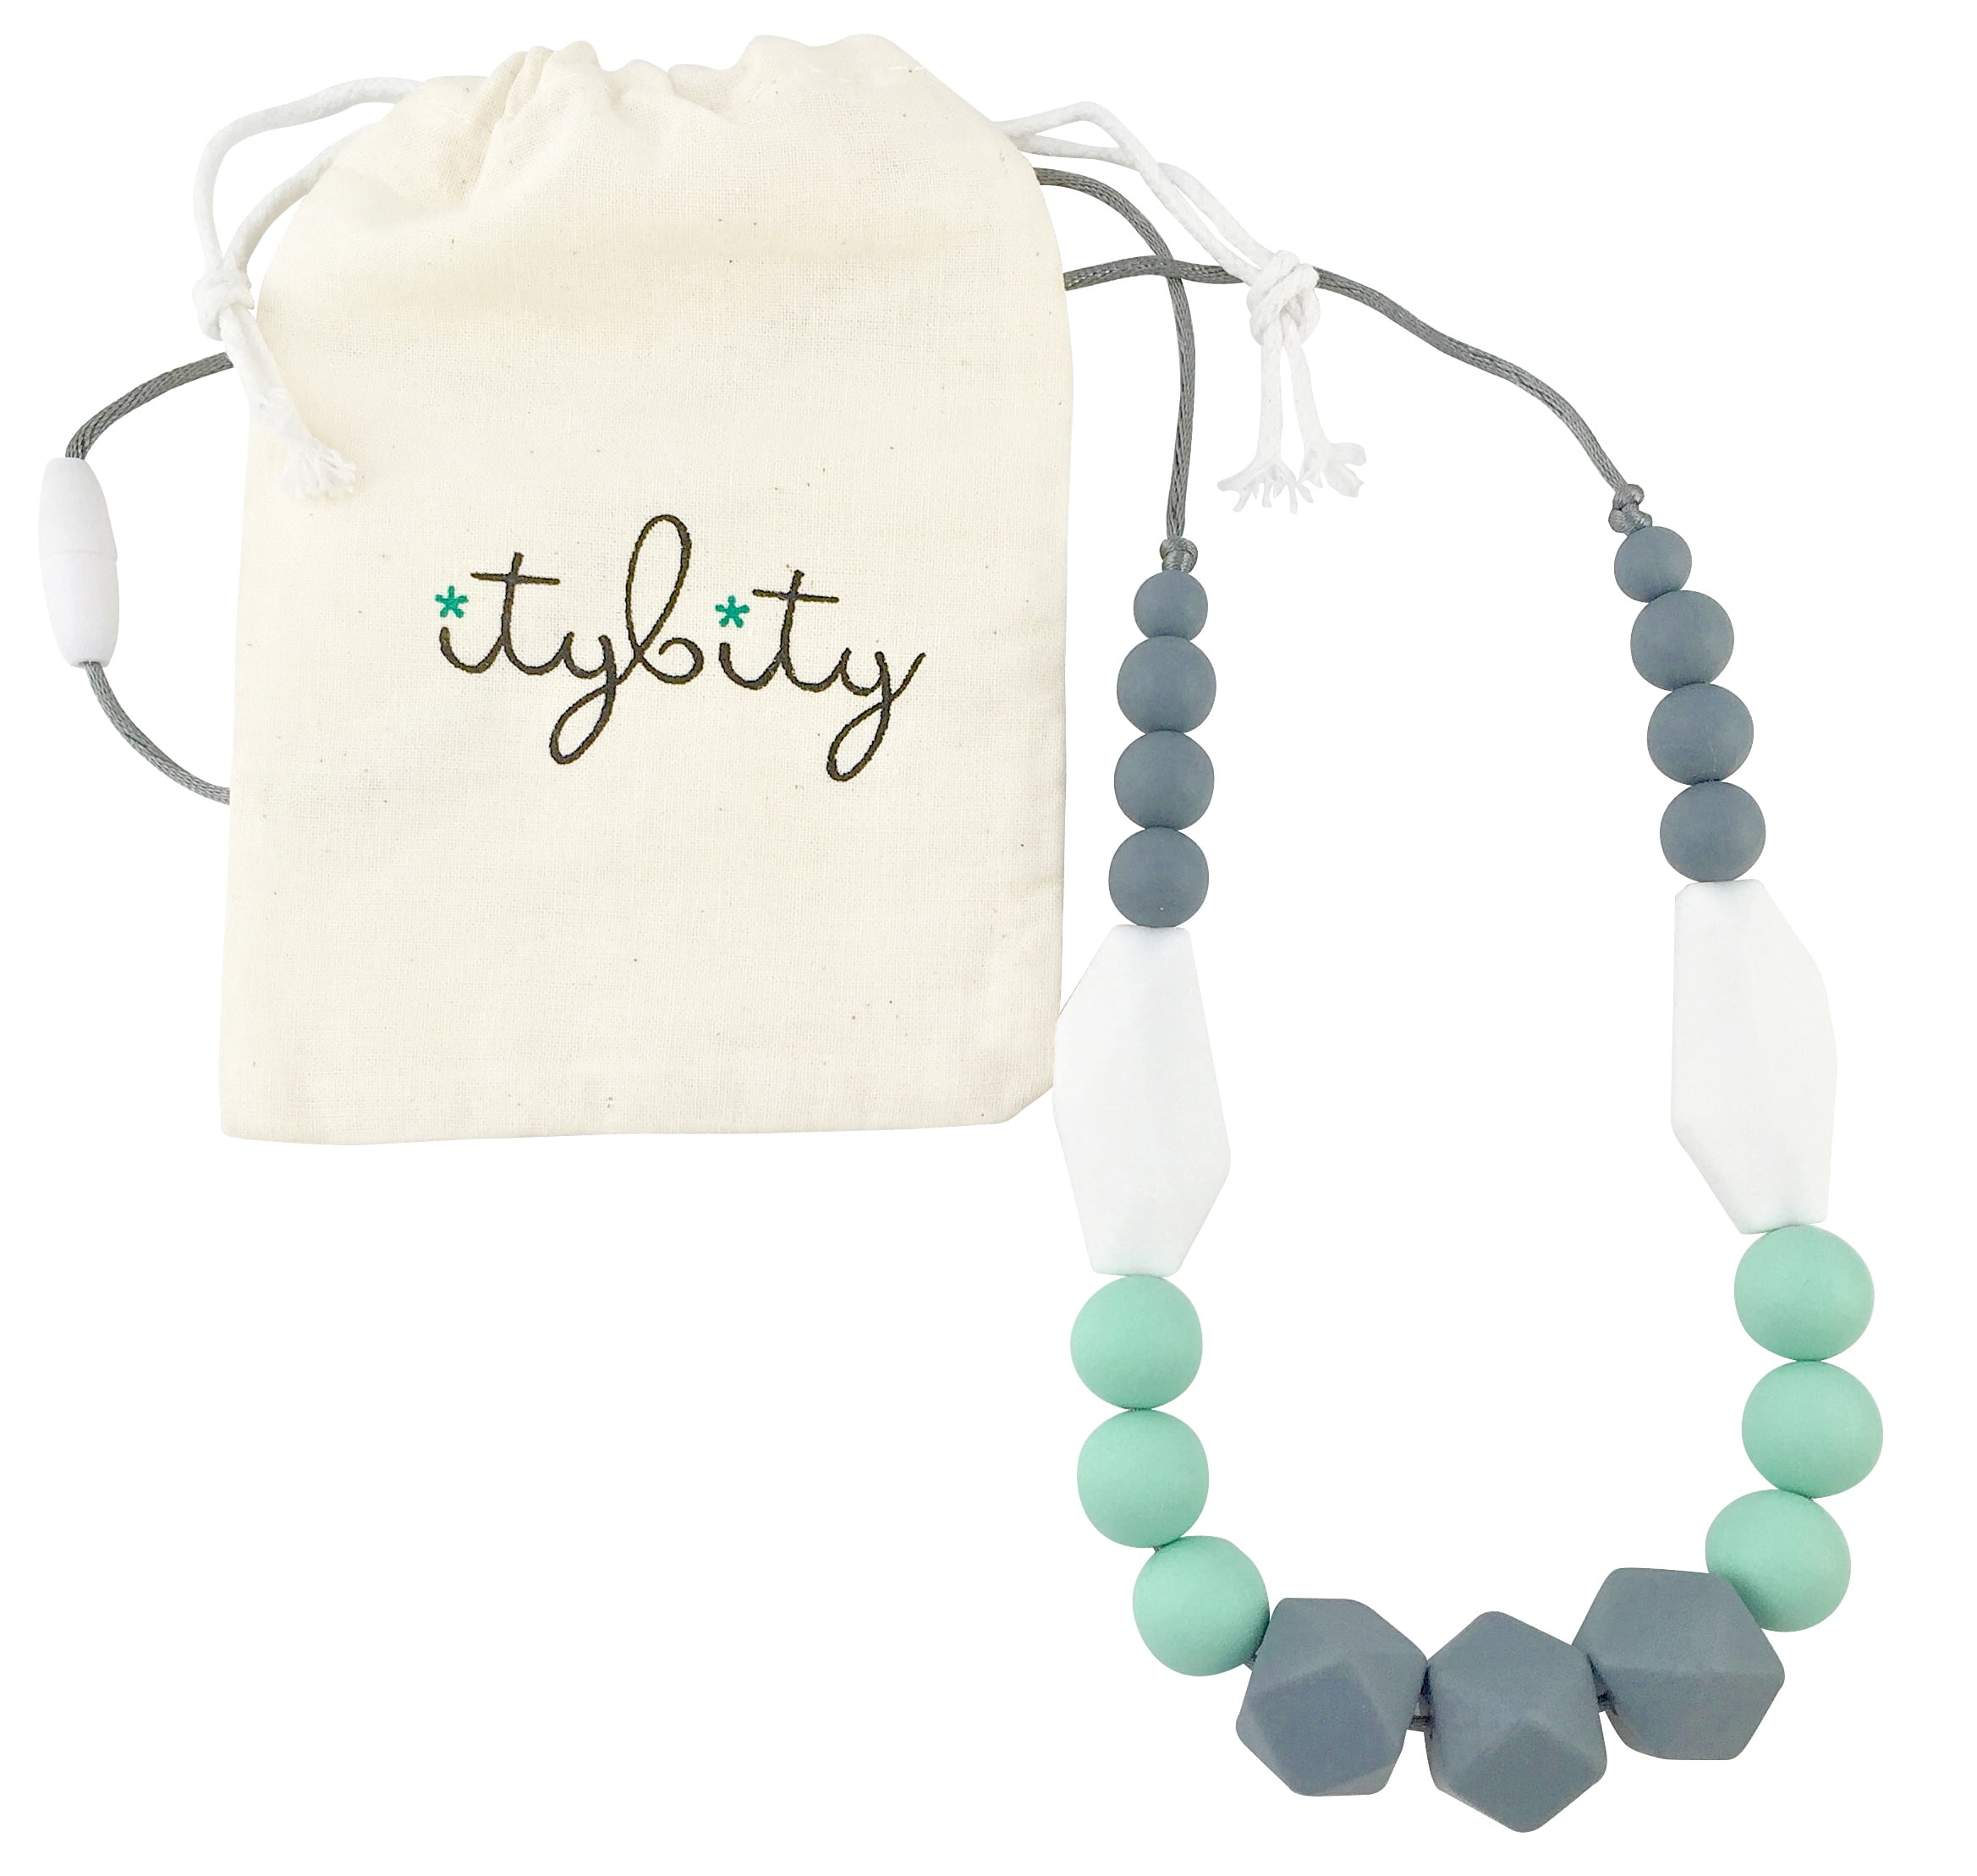 Nursing Jewelry Teething Necklace Silicone Baby Teether Black Gray Turquoise New 